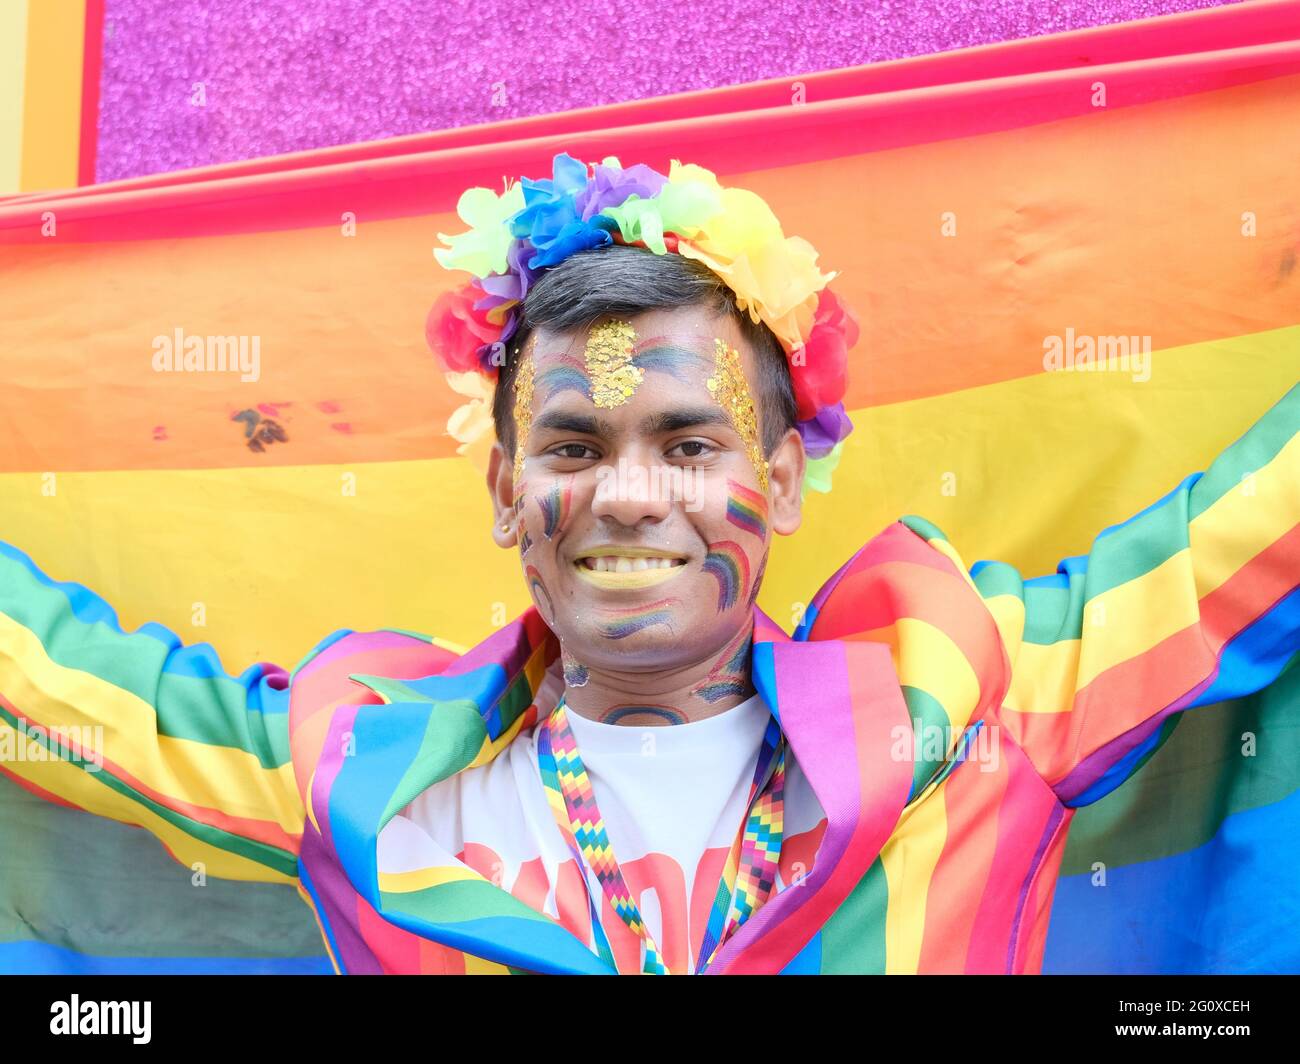 A Jubilee Pride in London participant holding a LGBT rainbow flag and dressed in a rainbow suit smiles for the camera. Stock Photo